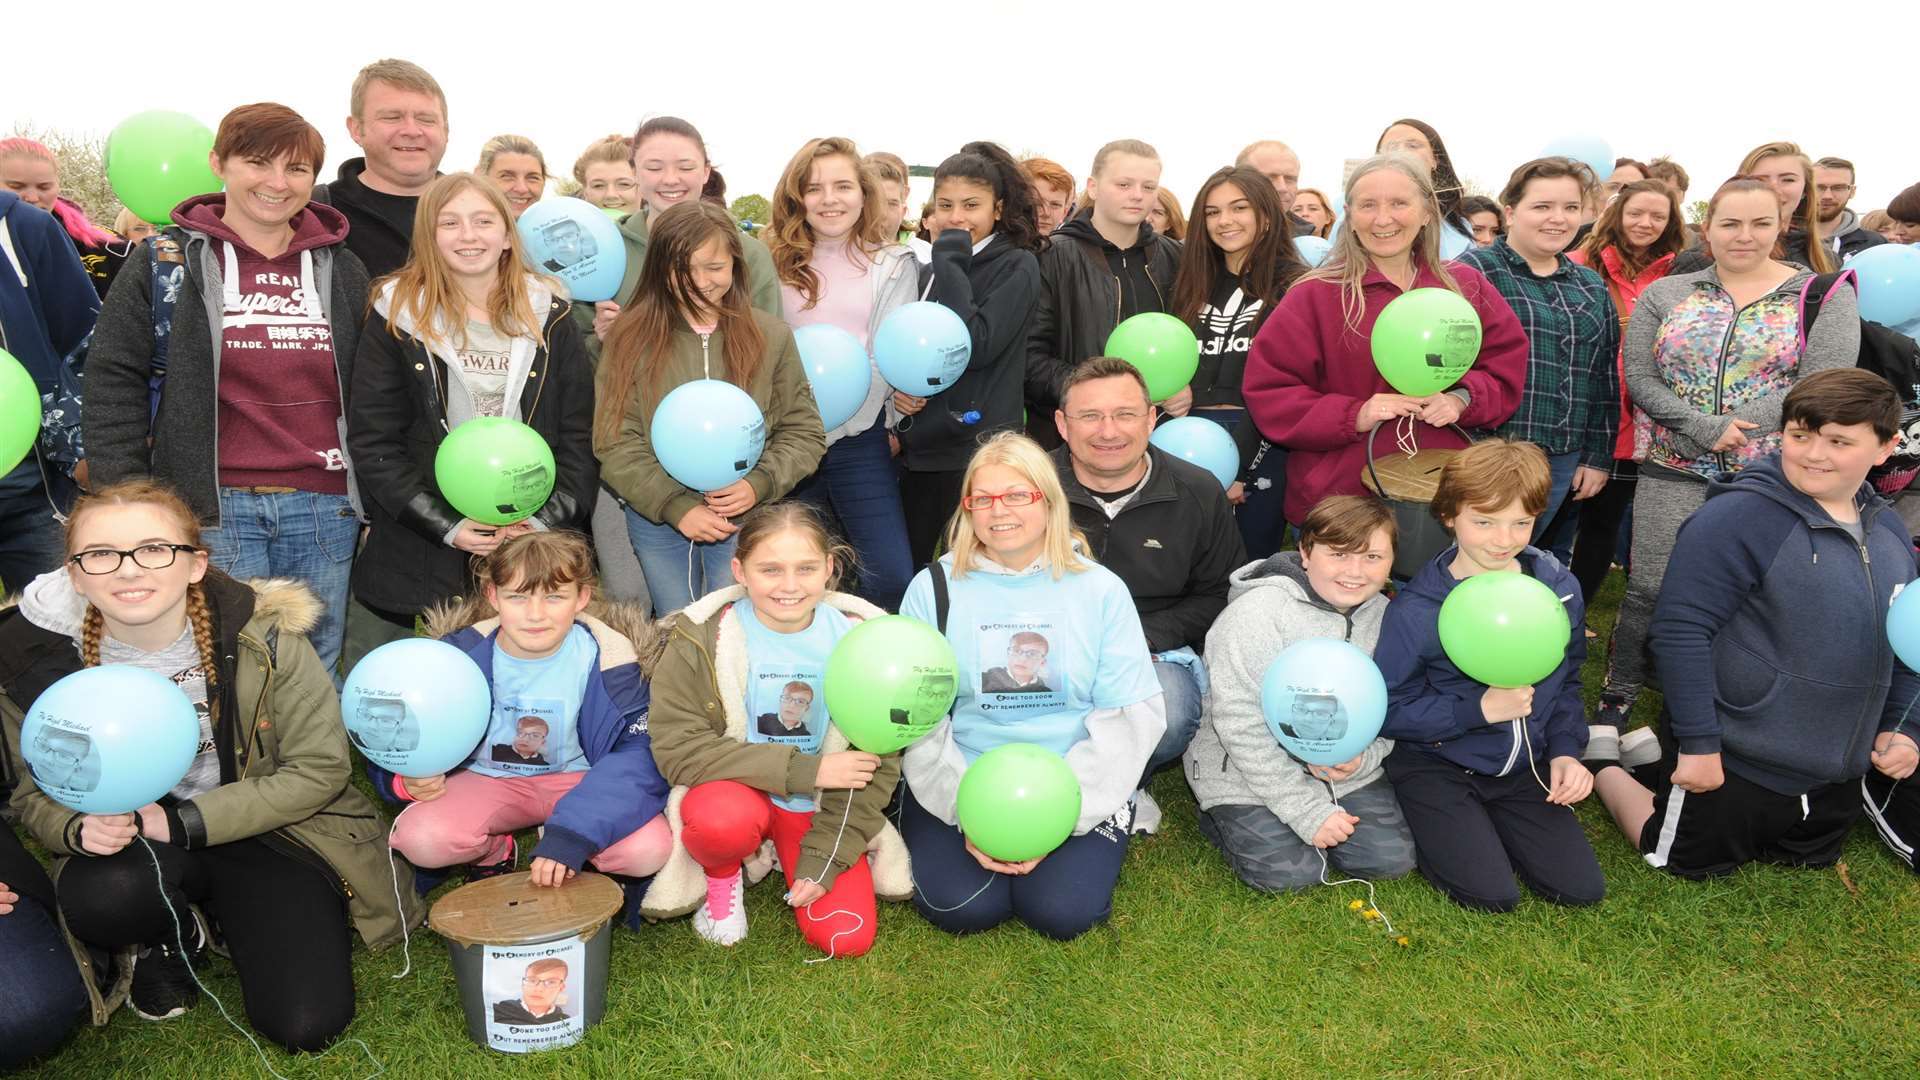 Hundreds turned out to walk in memory of Michael Crayford